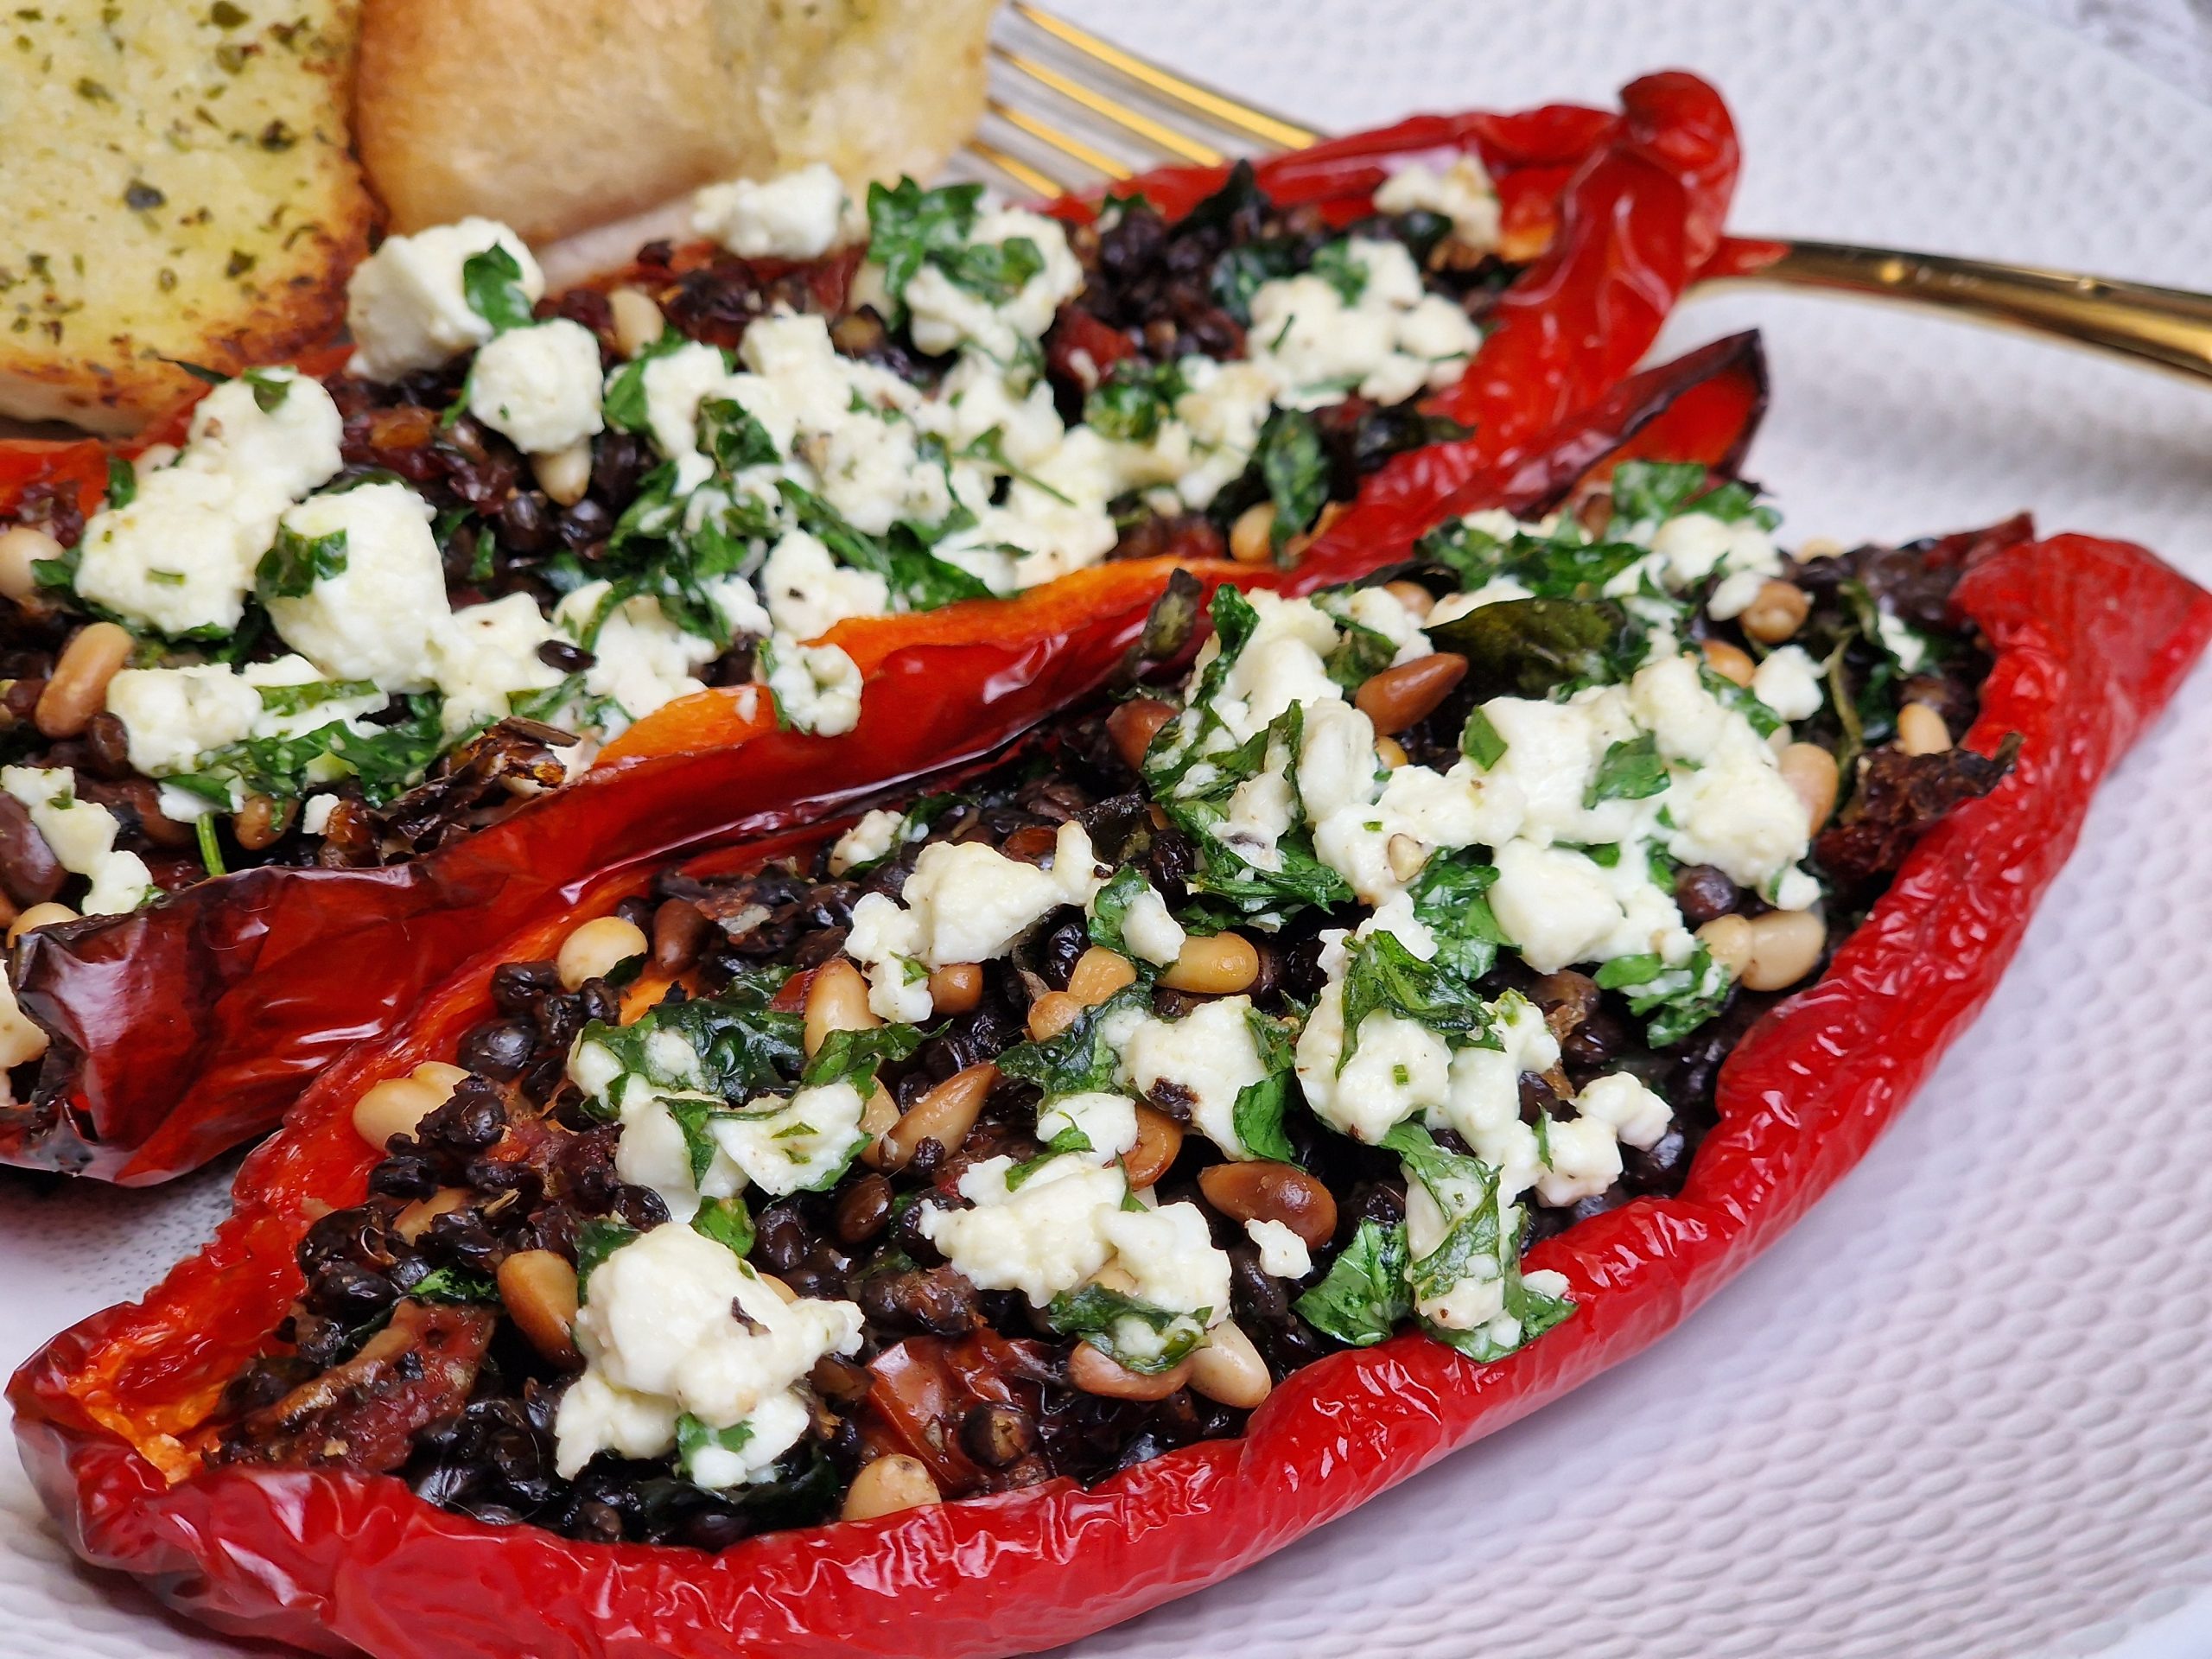 Stuffed Romano peppers with lentils, tomatoes and feta